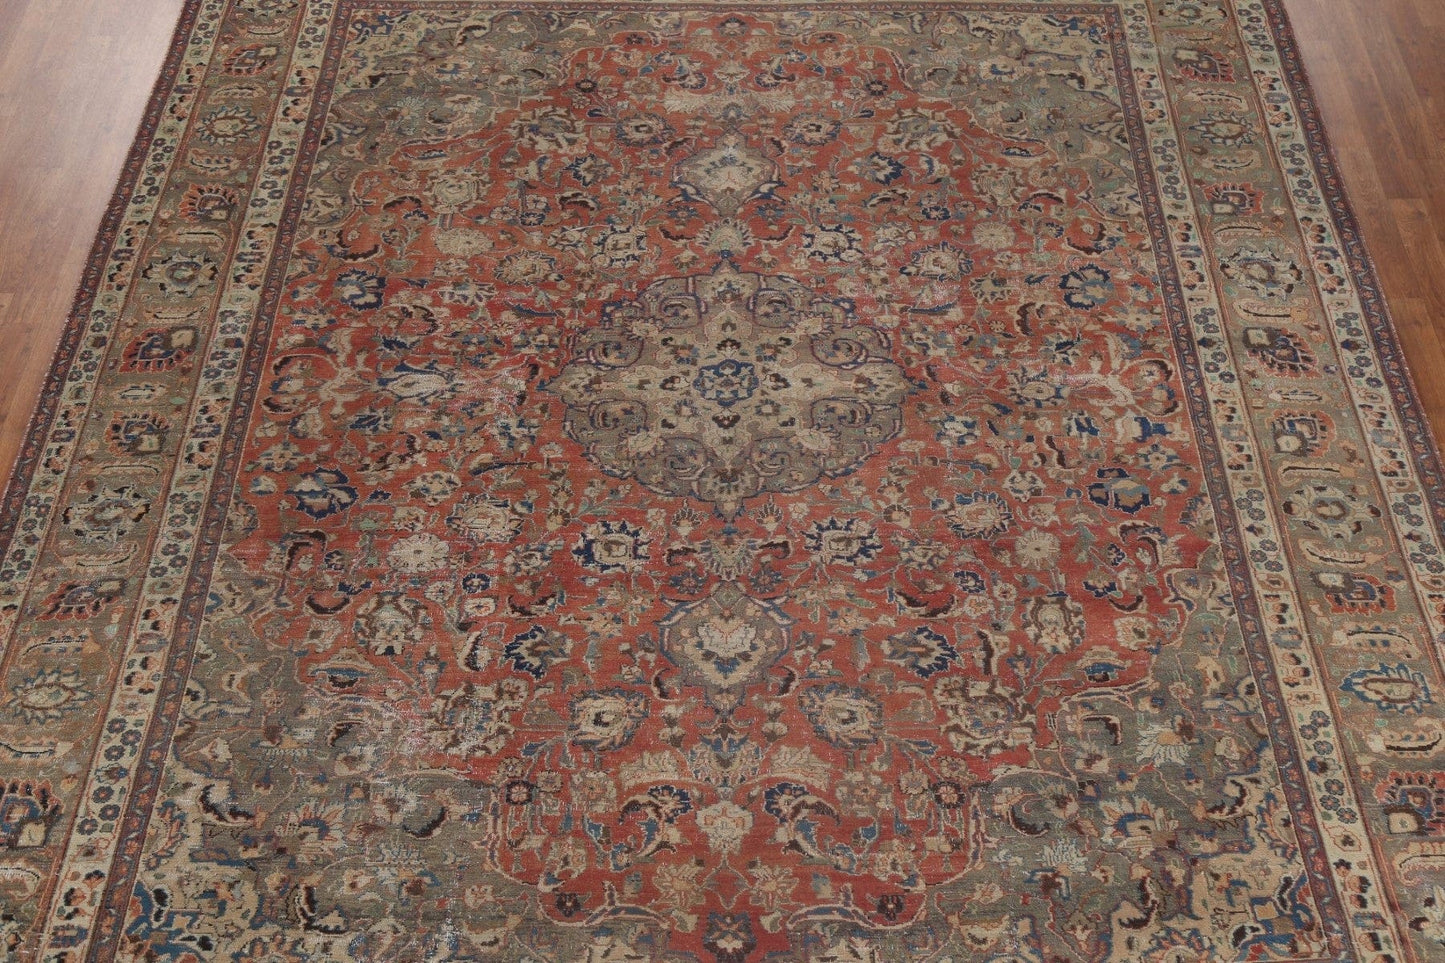 Hand-Knotted Wool Mashad Persian Rug 10x13